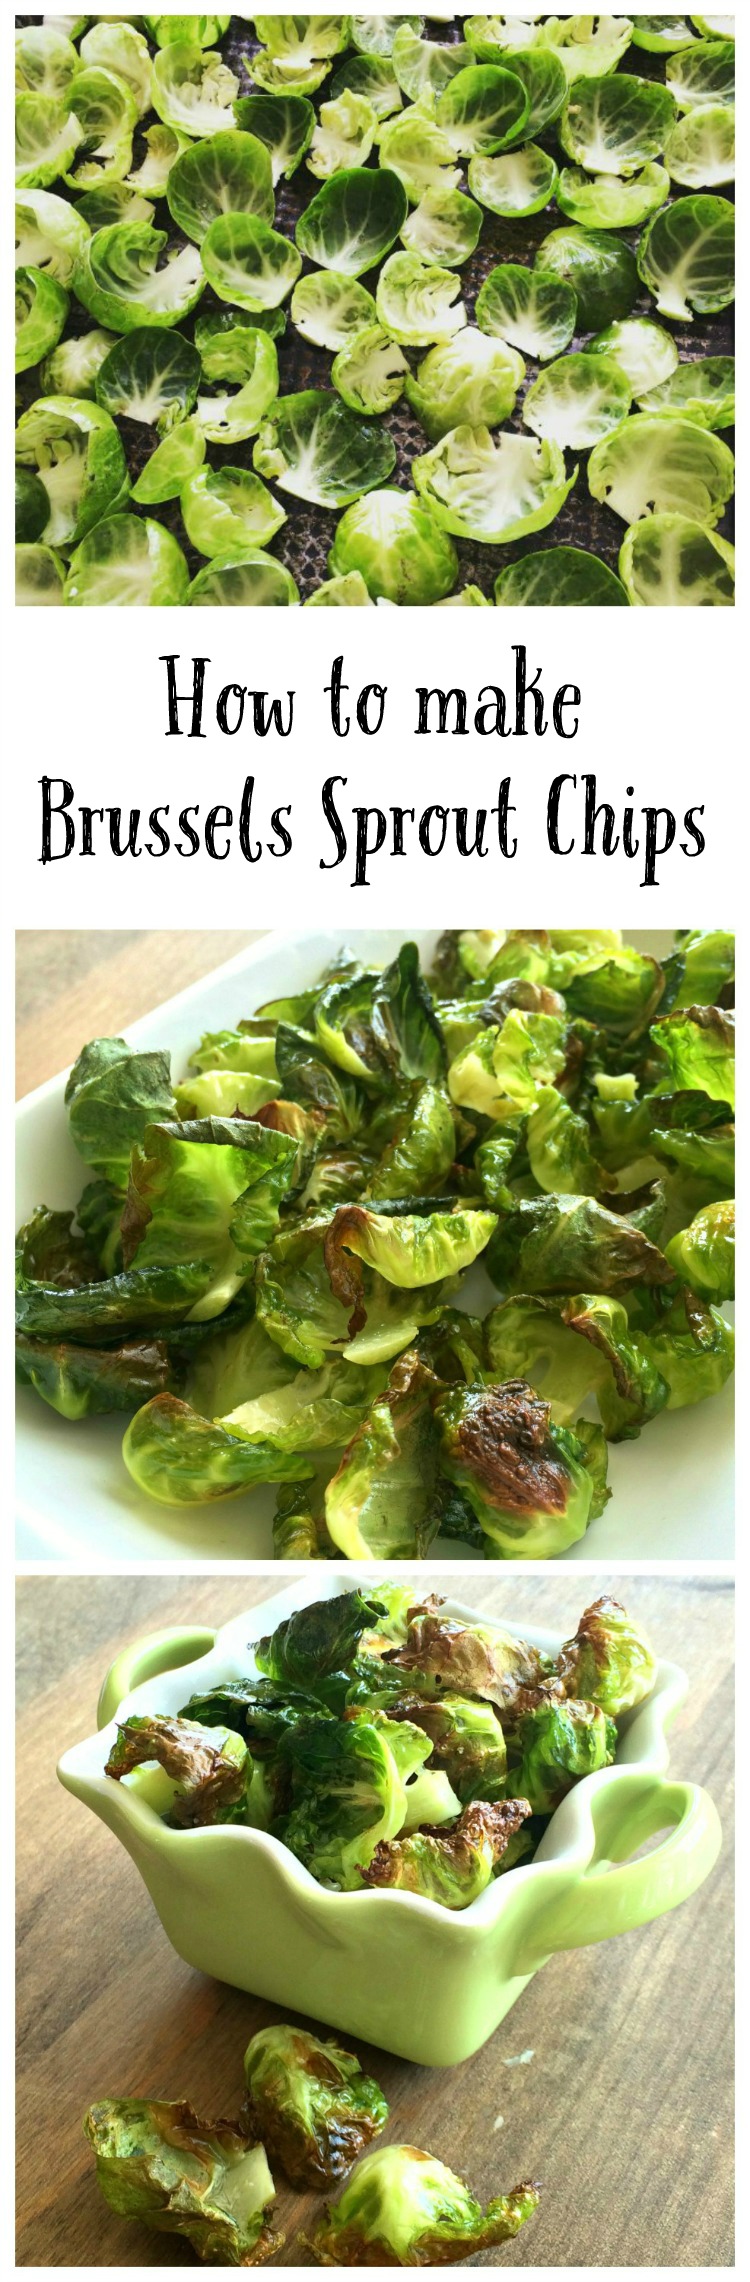 How to make Brussels Sprout Chips for healthy vegan snacking | ShockinglyDelicious.com